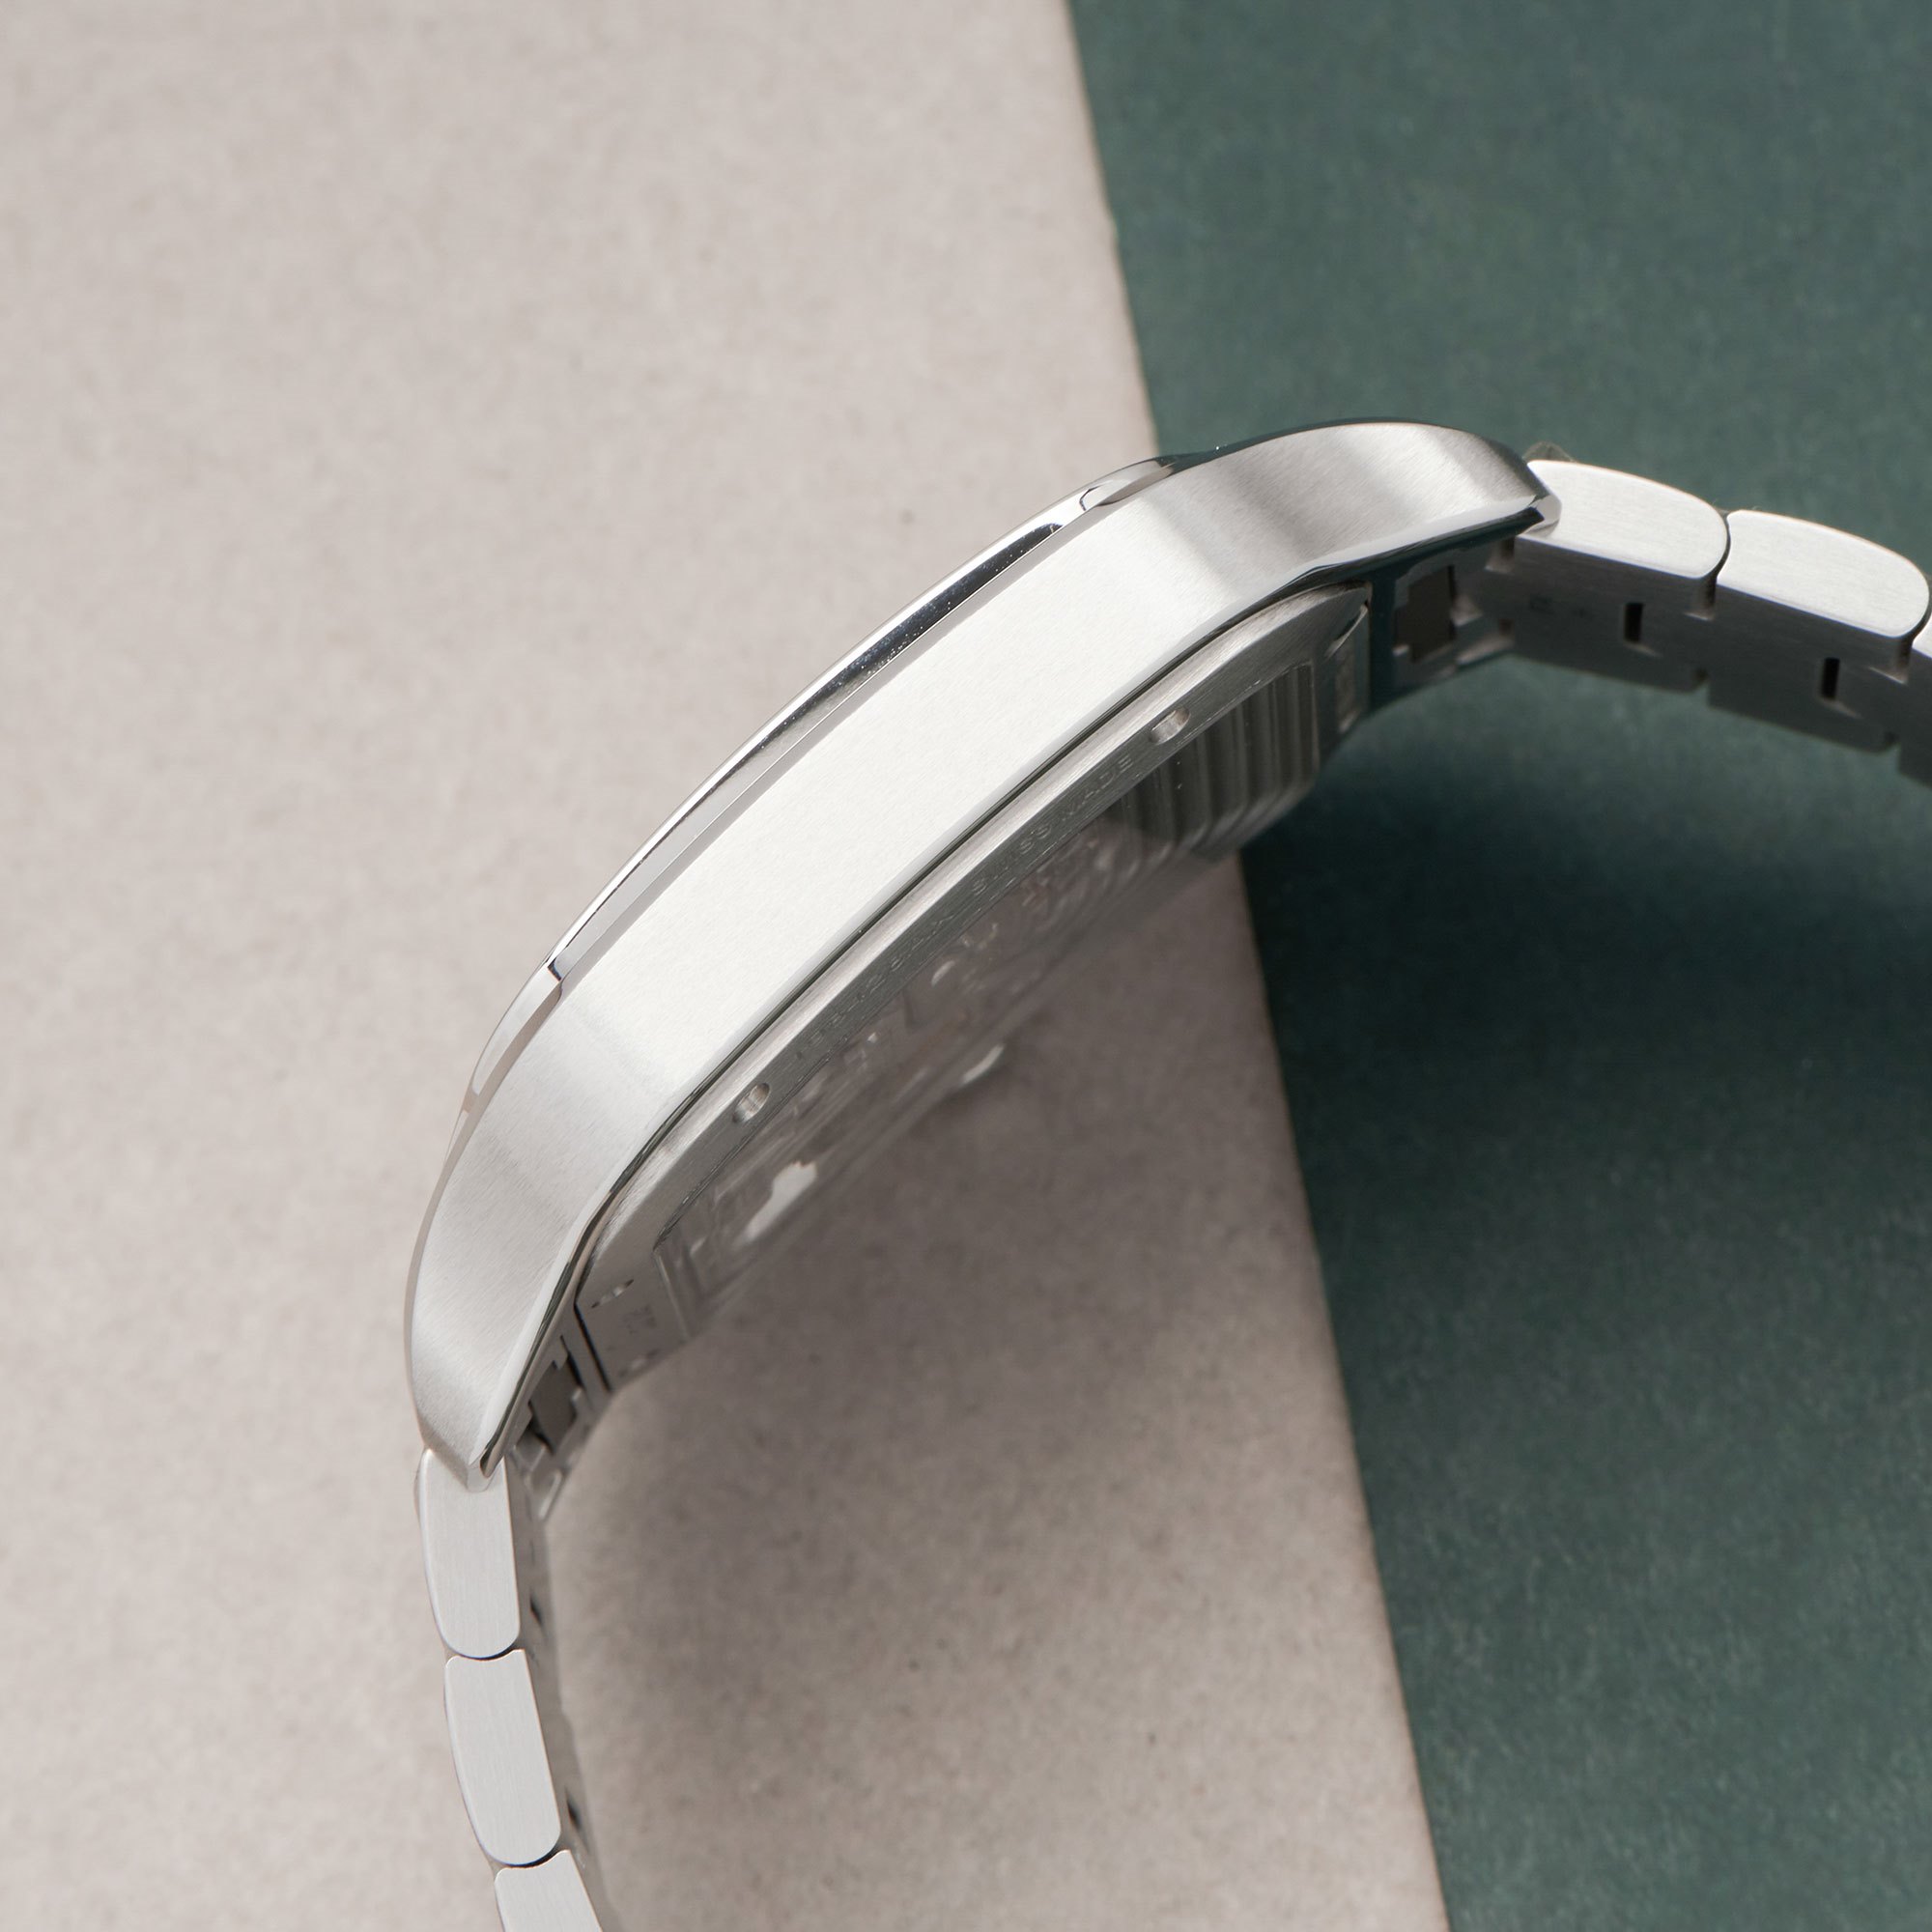 Cartier Santos Stainless Steel WHSA0015 or 4109